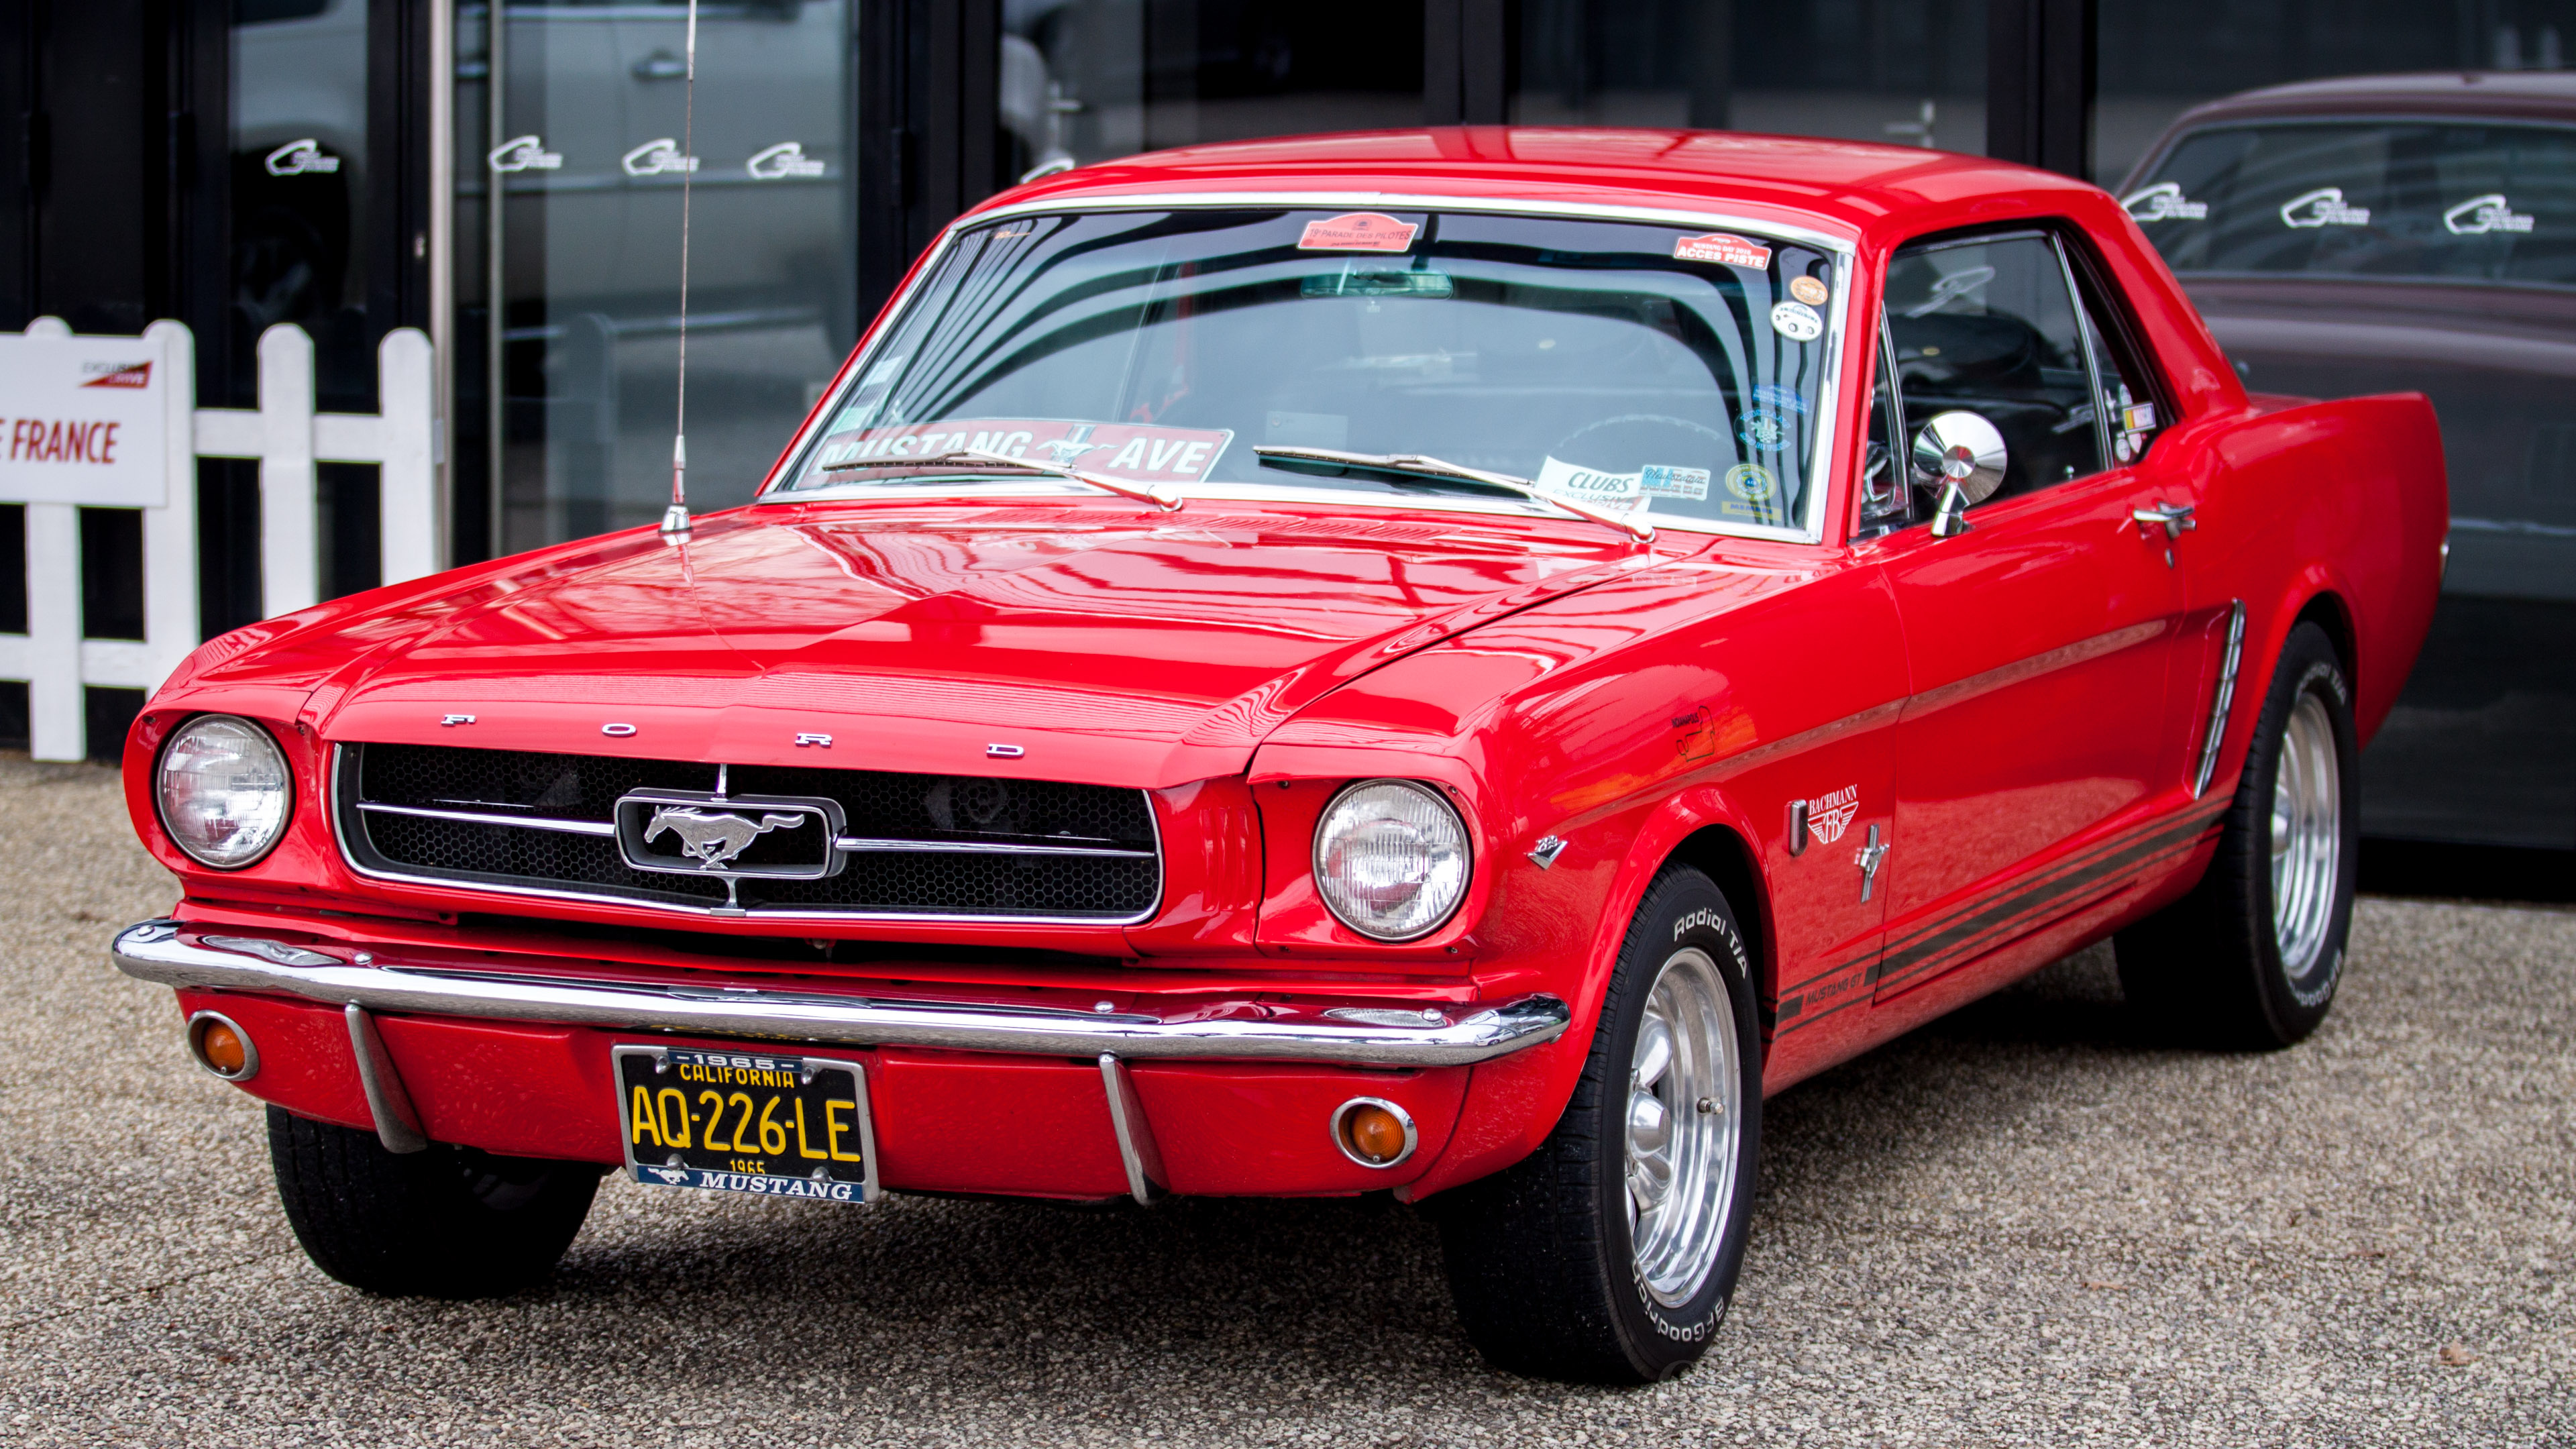 Classic Mustang Car Wallpapers posted by Samantha Mercado 3840x2160